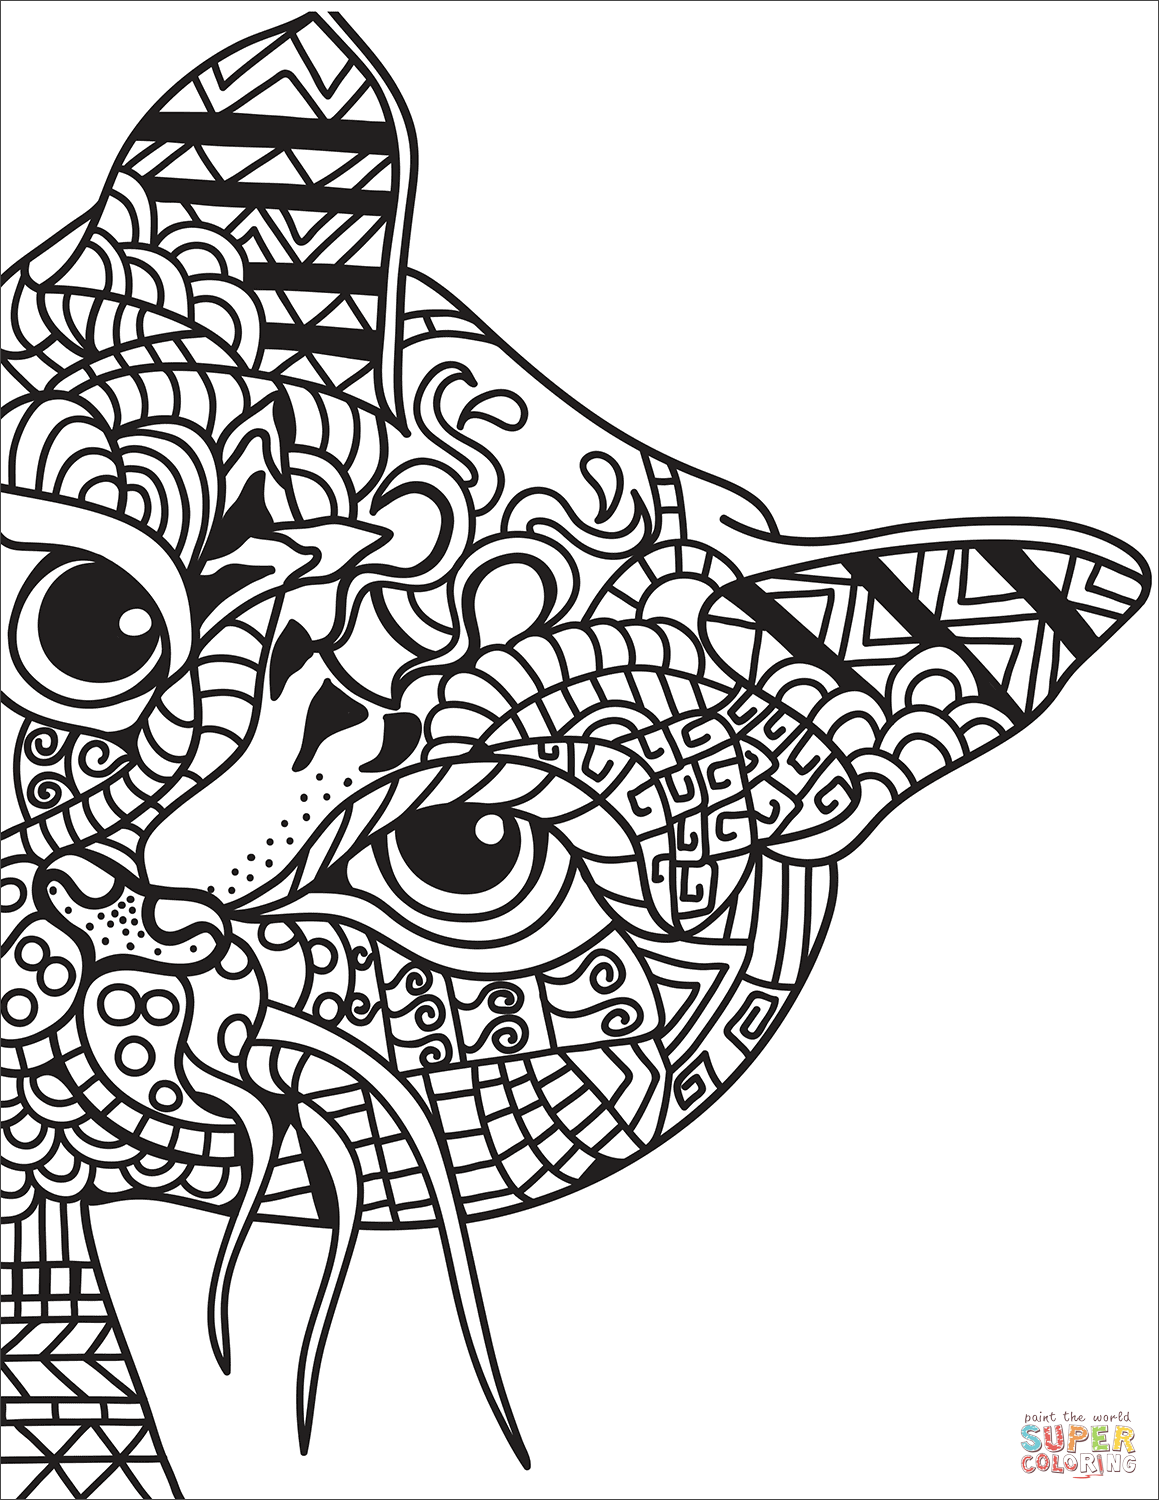 Download 20 Easy Coloring Sheets for Seniors - Healthcare Channel ...